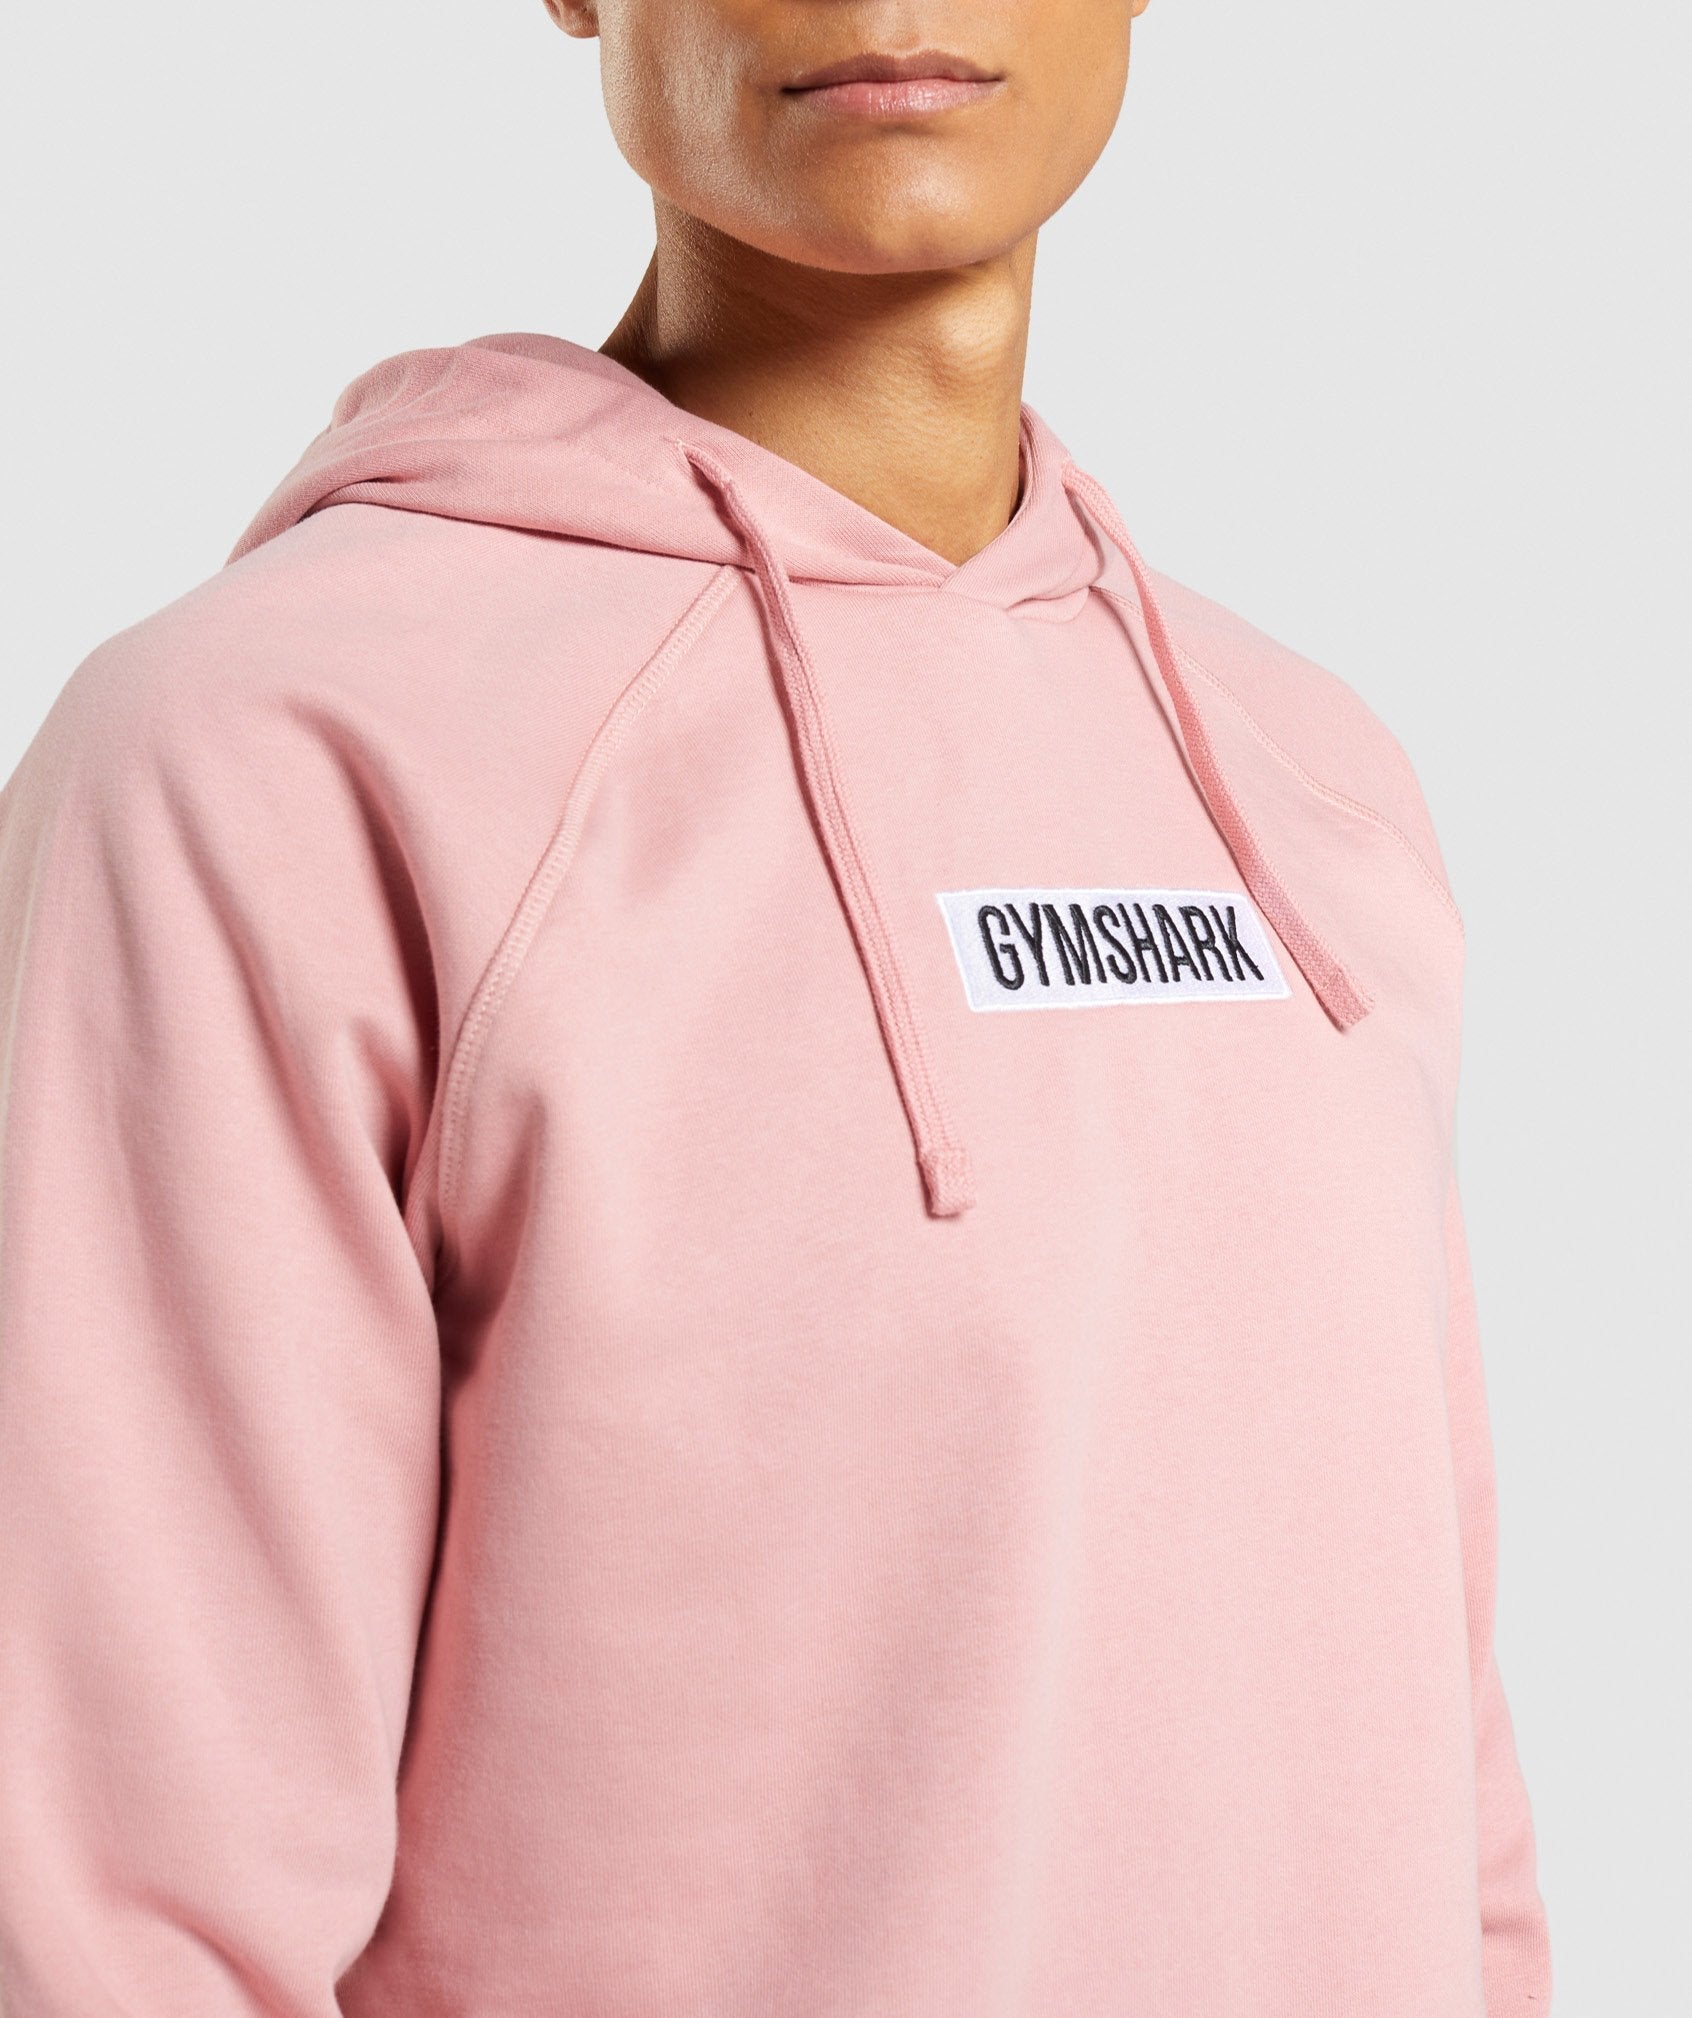 Central Hoodie in Pink - view 6